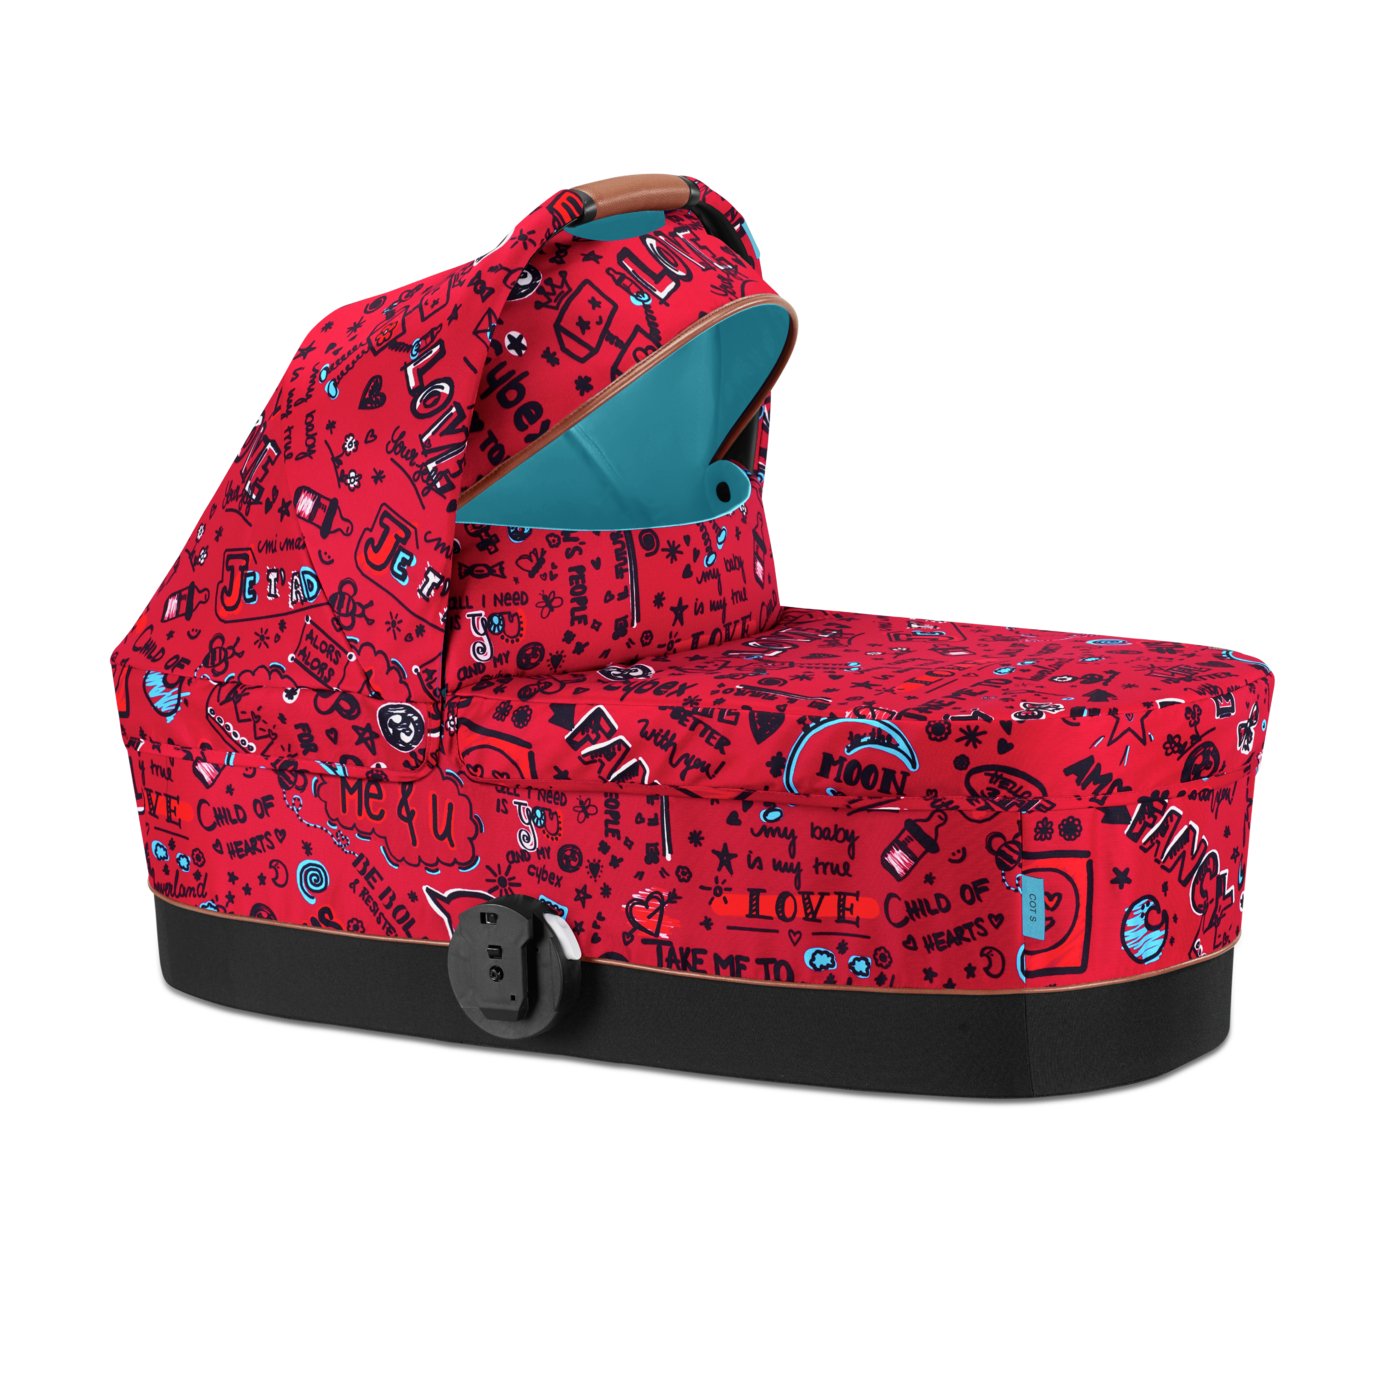 Cybex Cot S Special Edition Carry Cot Review